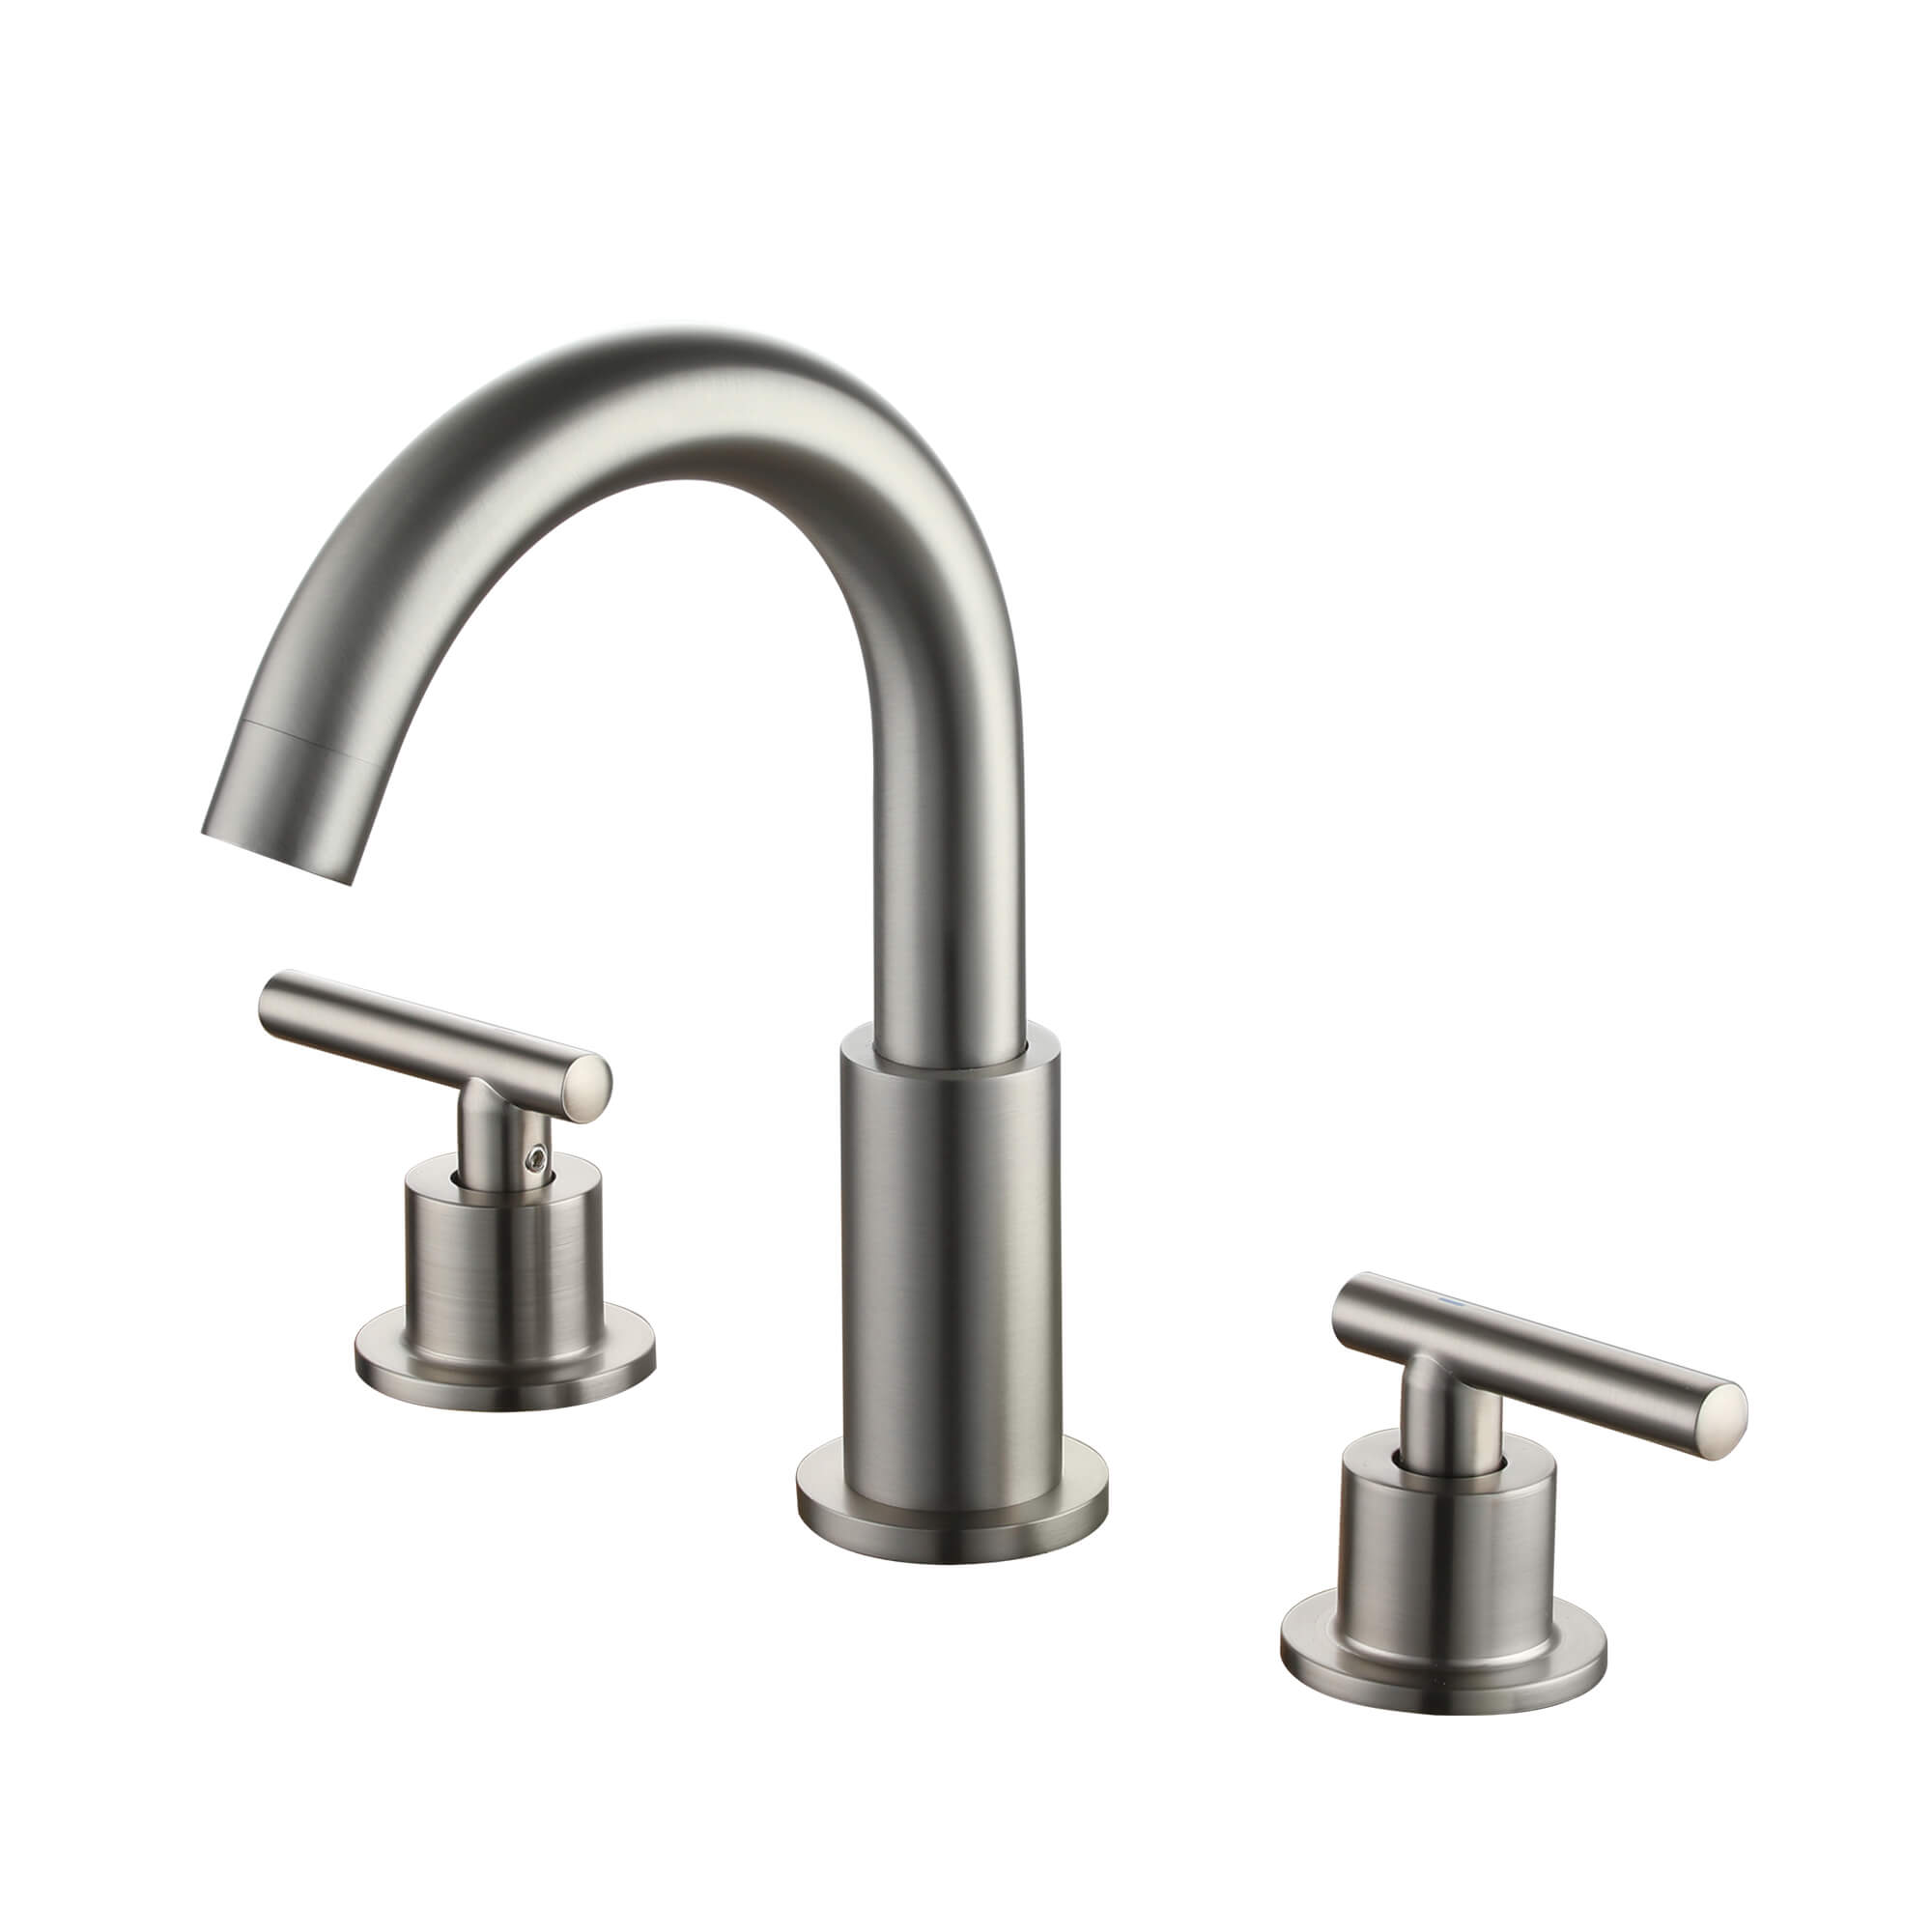 8-in Widespread 3-Hole Mid-Arc Bathroom Sink Faucet with 2-Handle